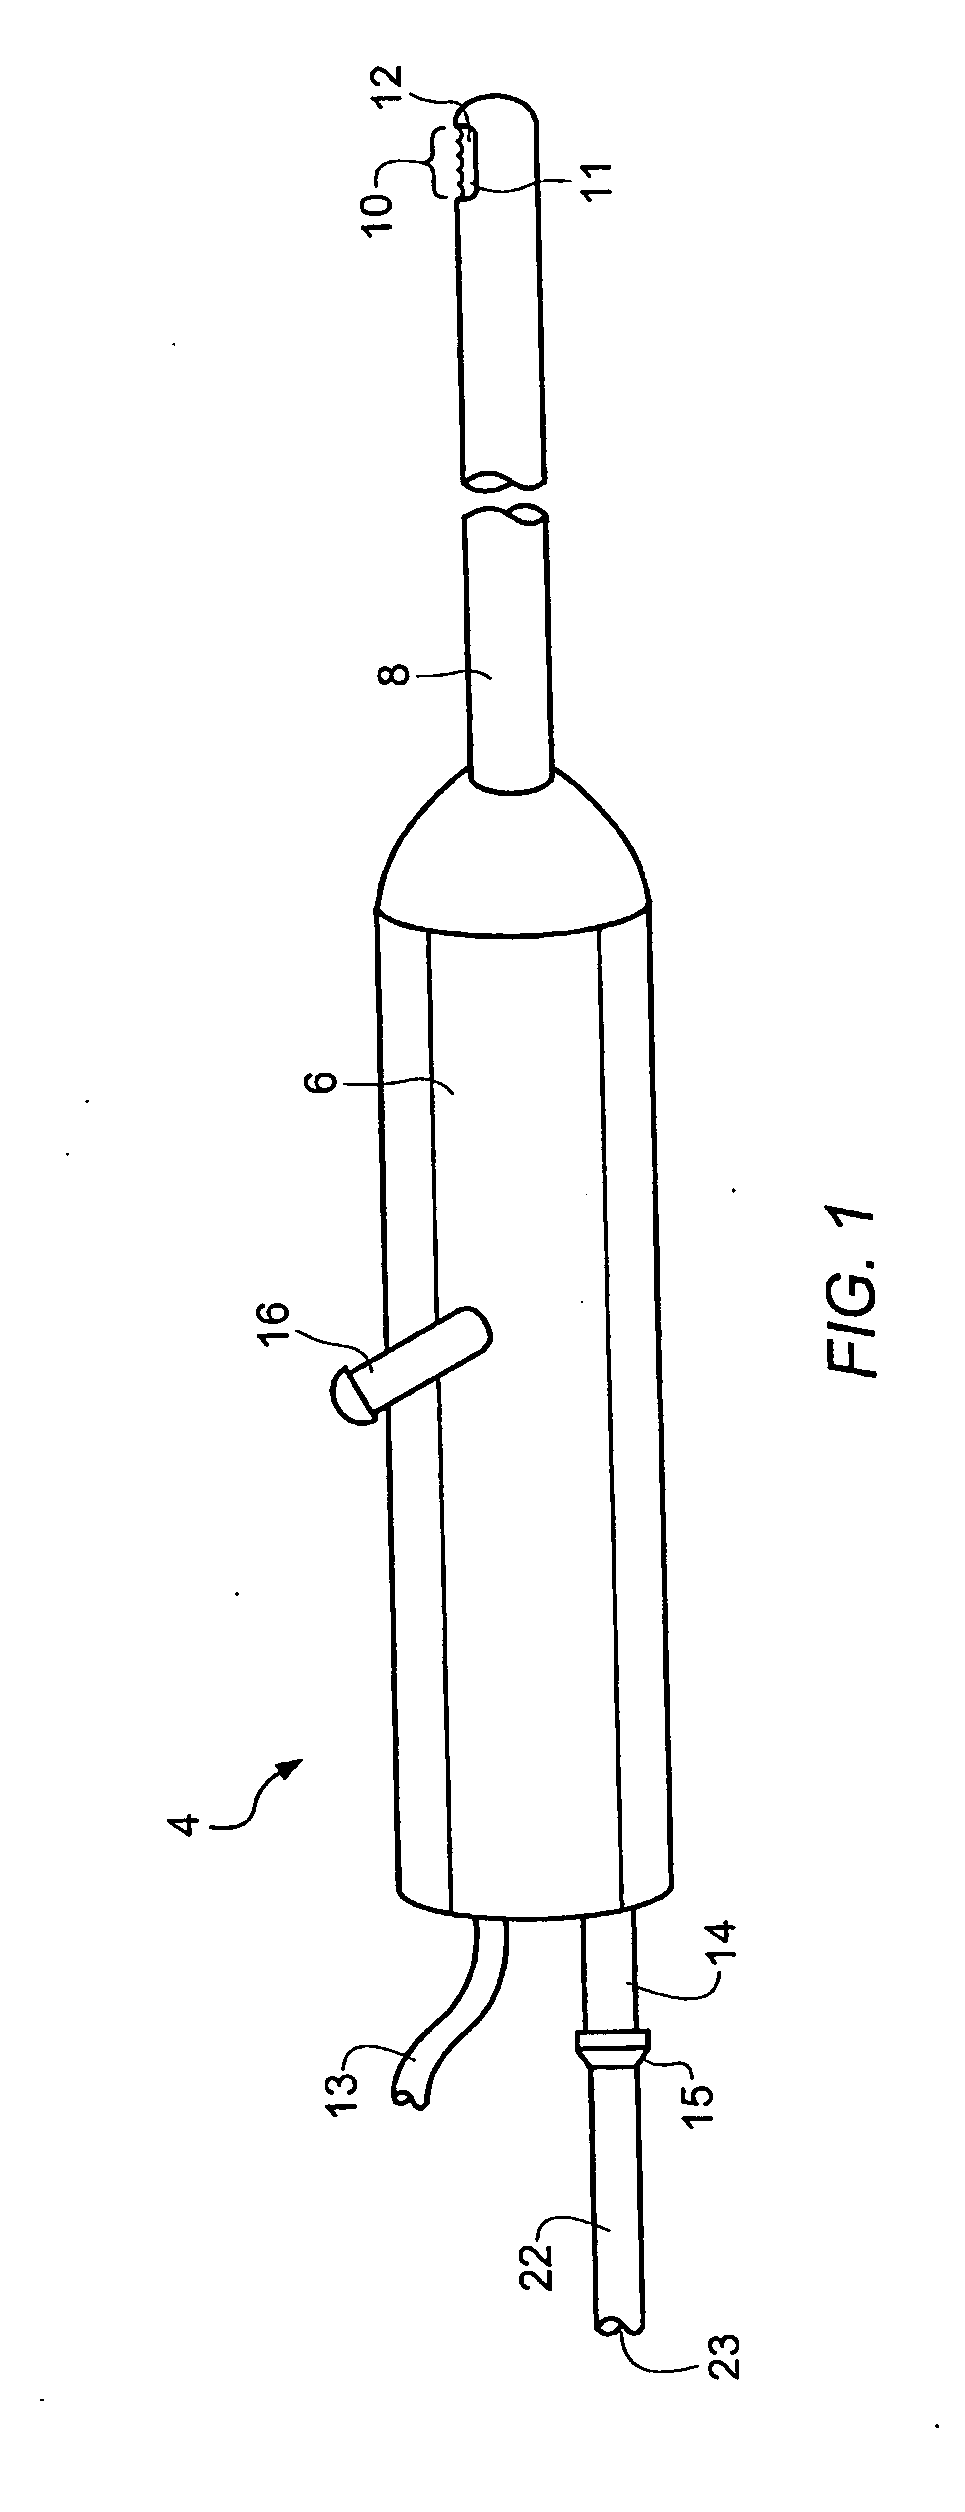 Apparatus and methods for clearing obstructions from surgical cutting instruments